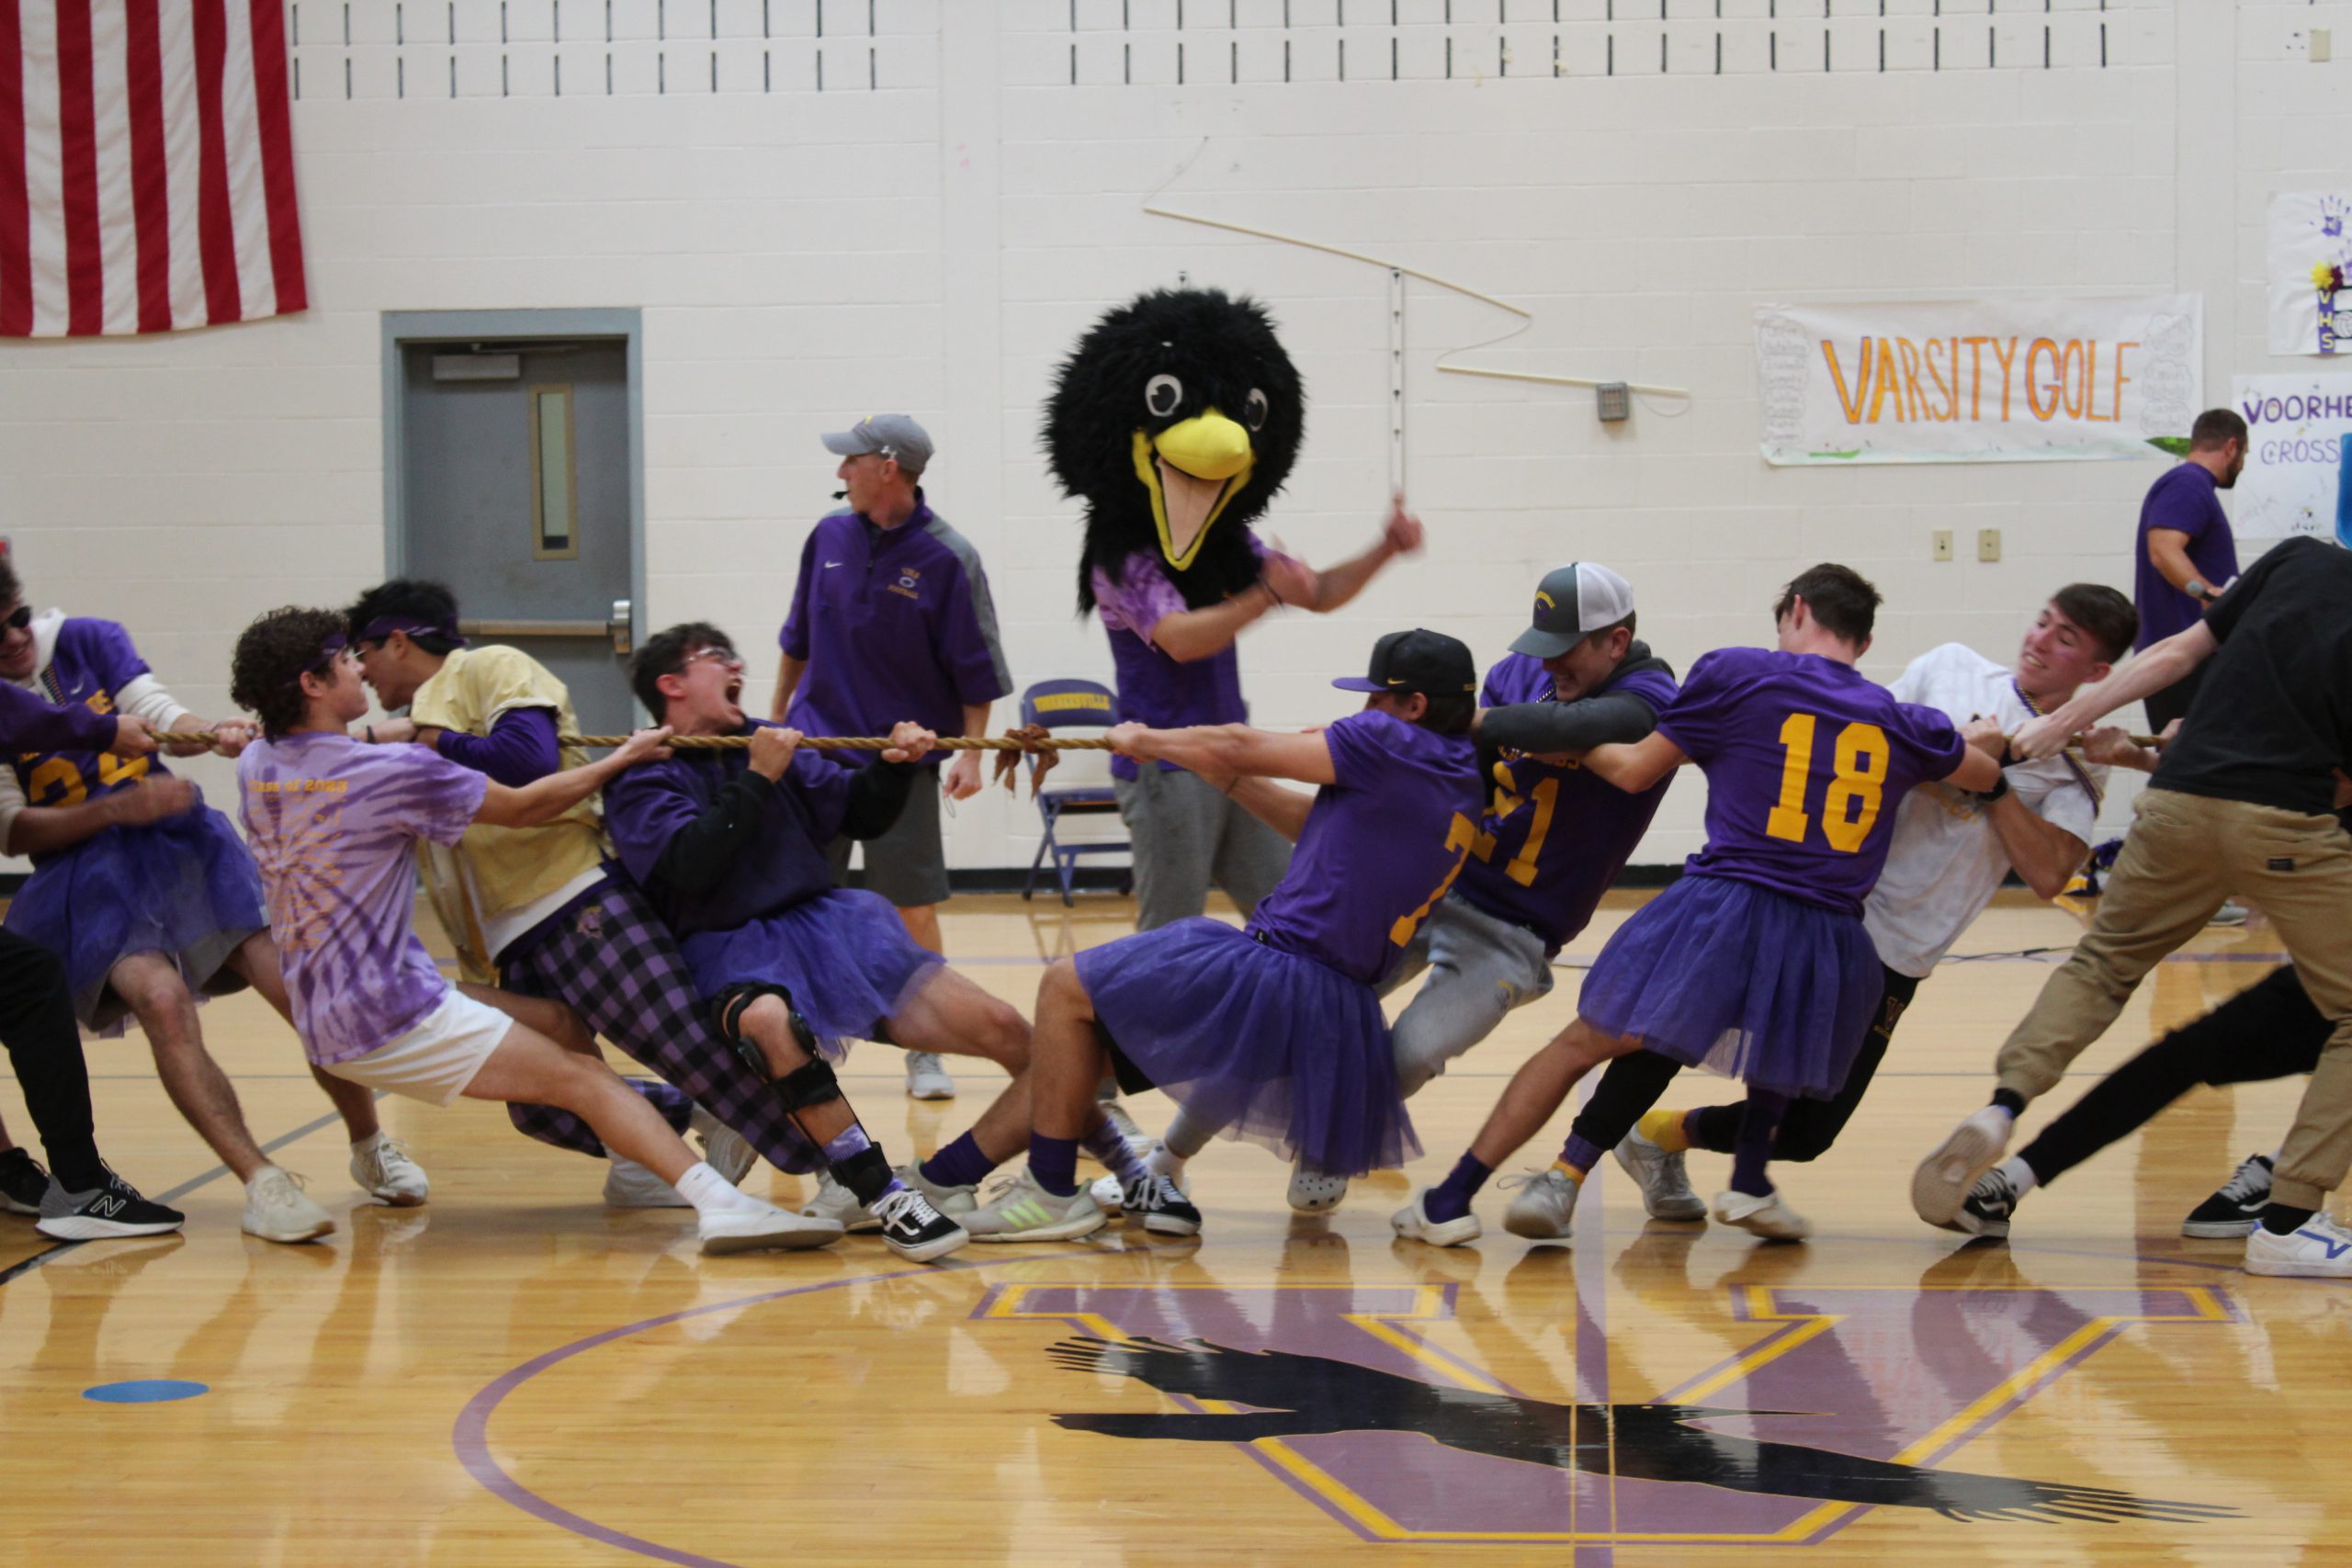 A photo of students engaging in a game of tug of war with the Voorheesville Blackbird mascot cheering them on